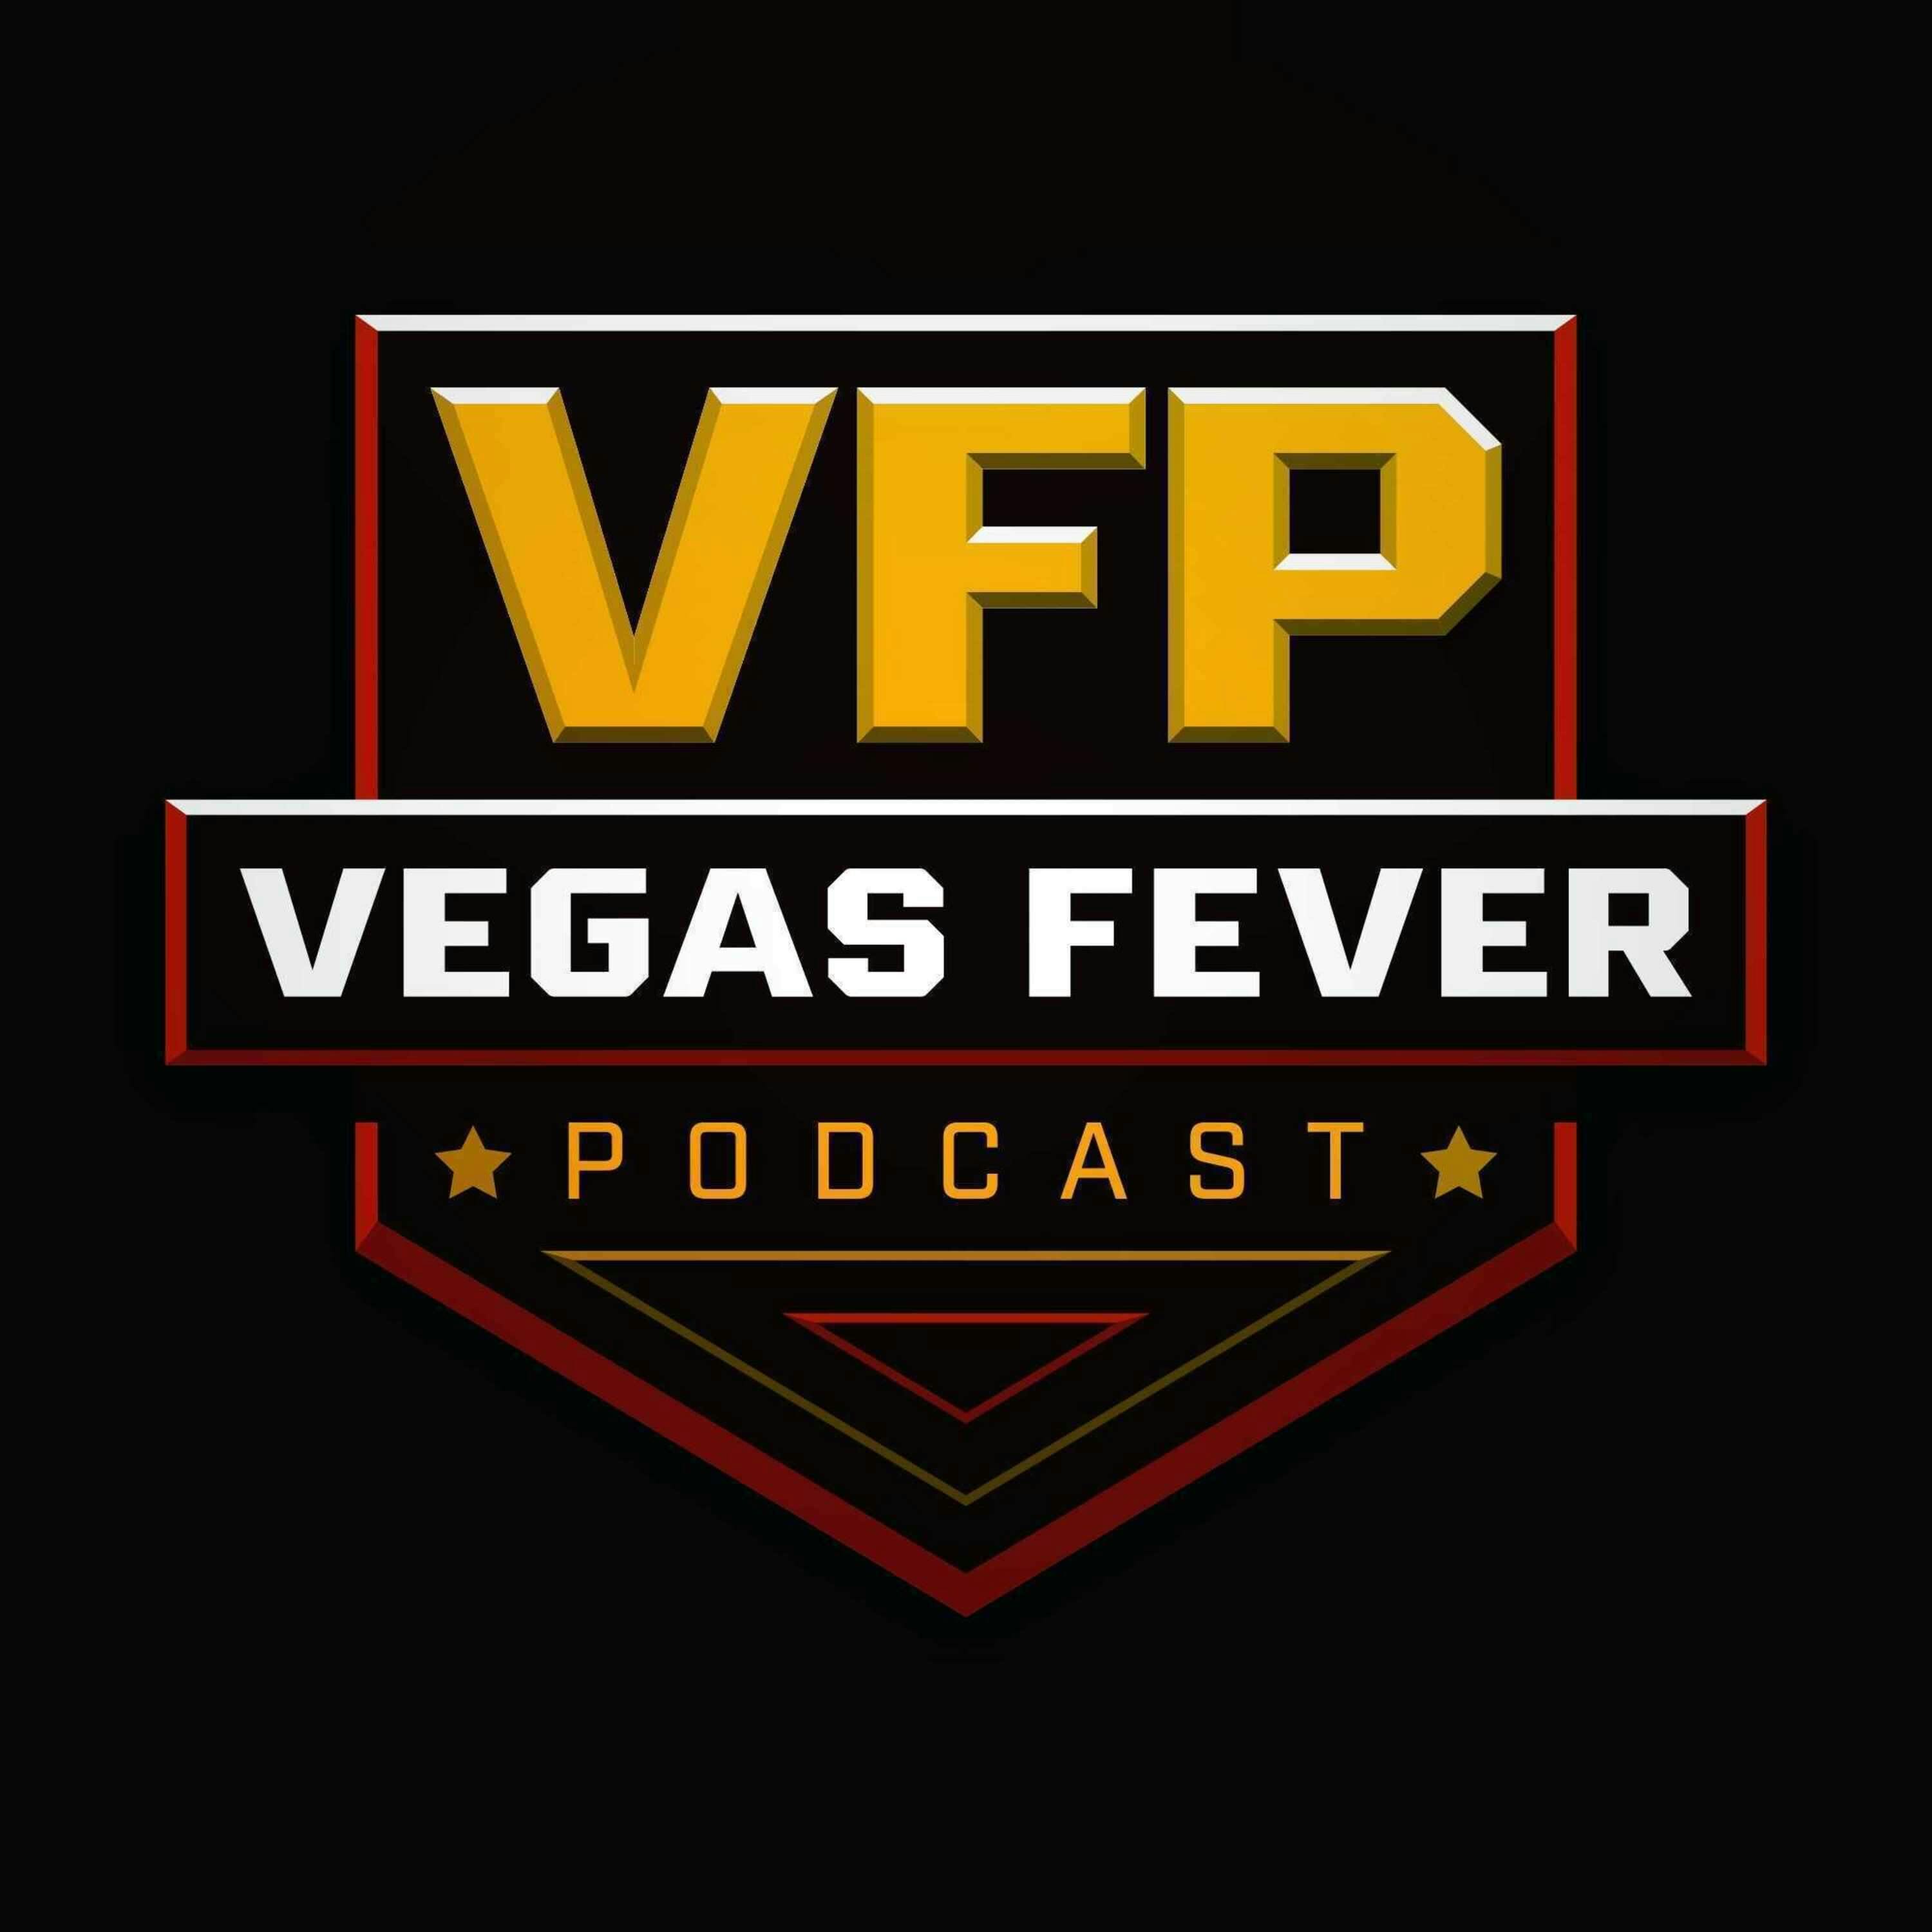 Episode 17- UNLV's Big 12 additions continue, VGK has its ups and downs. New Arena on the strip?